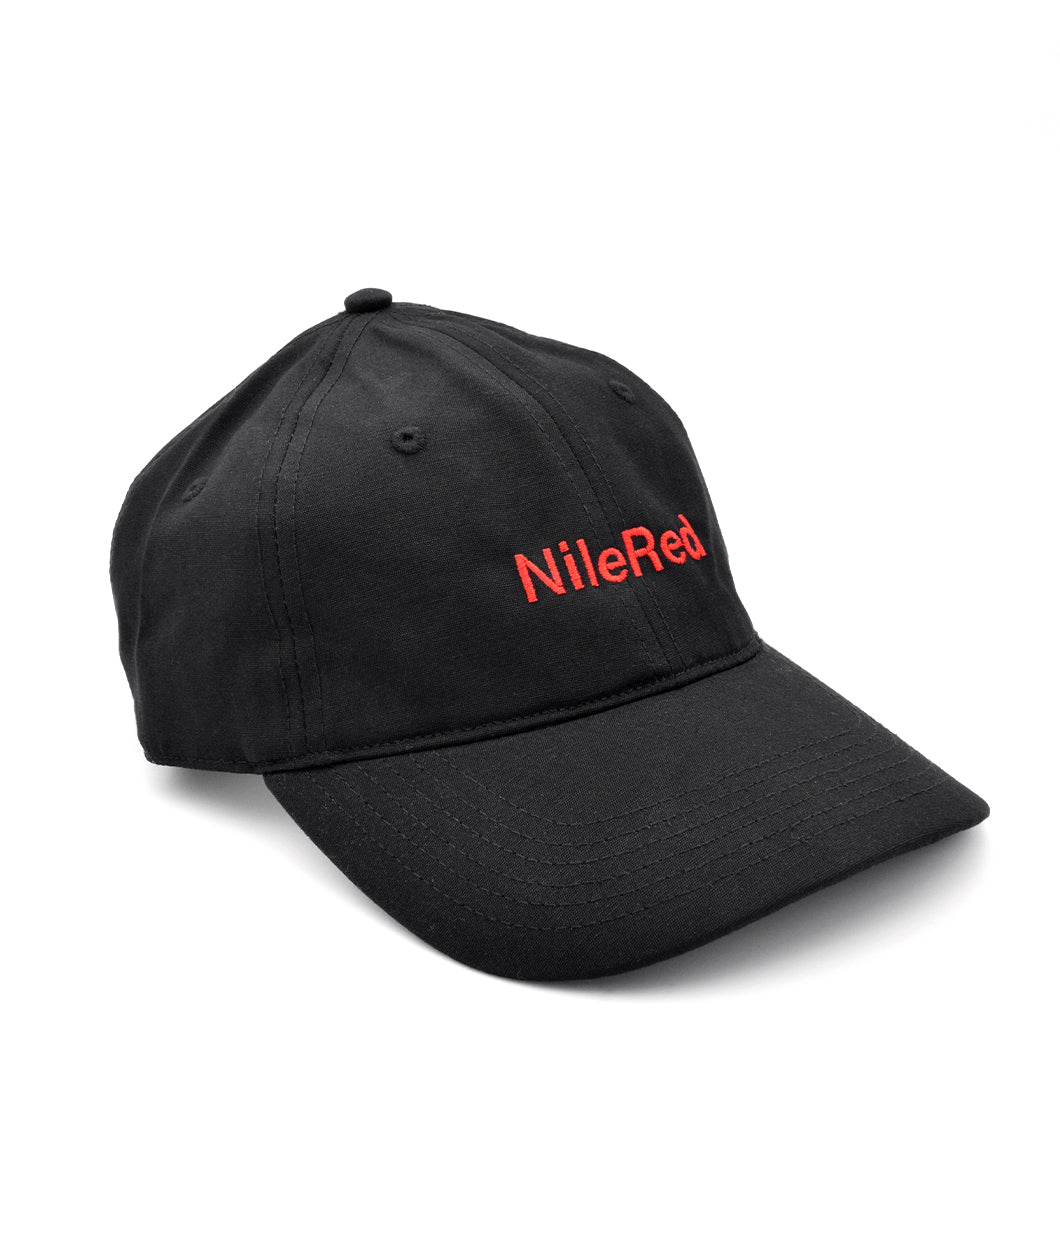 Black ball cap with 